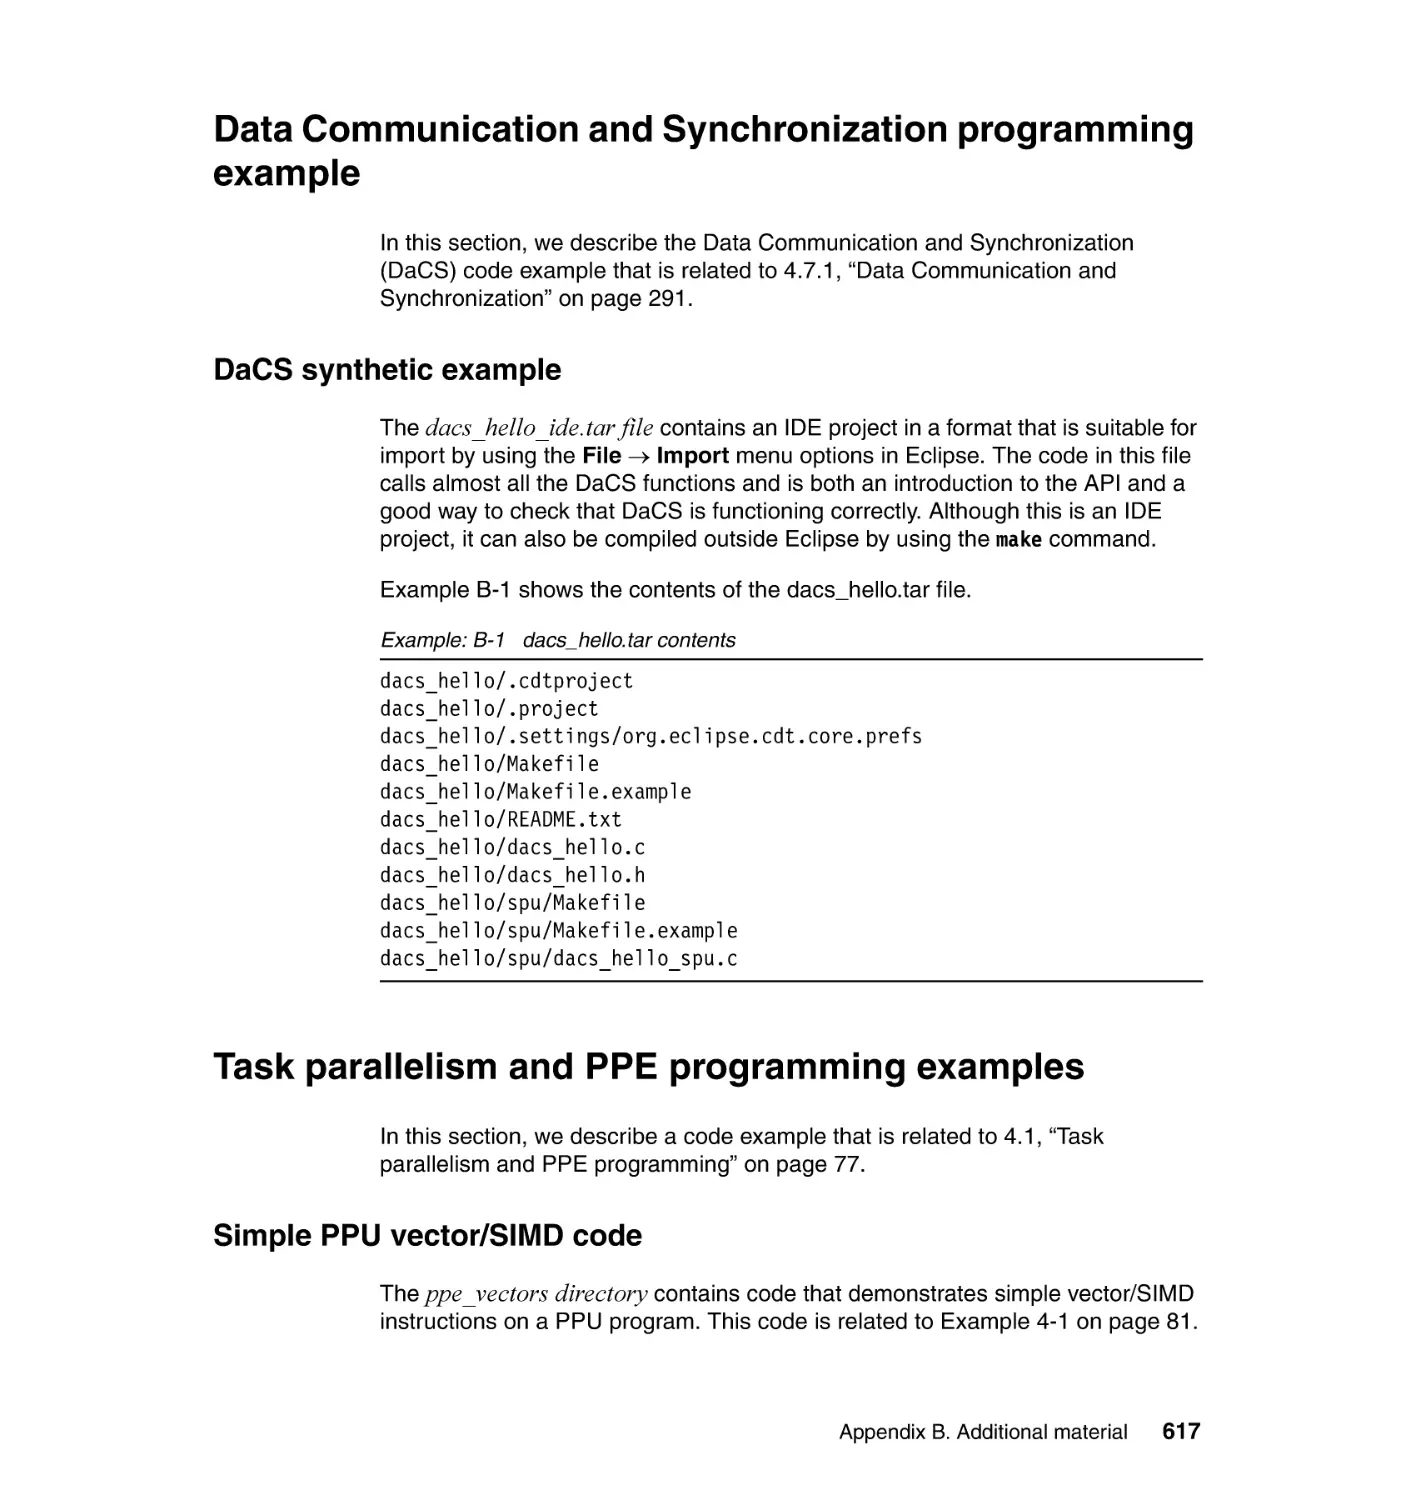 Data Communication and Synchronization programming example
DaCS synthetic example
Task parallelism and PPE programming examples
Simple PPU vector/SIMD code